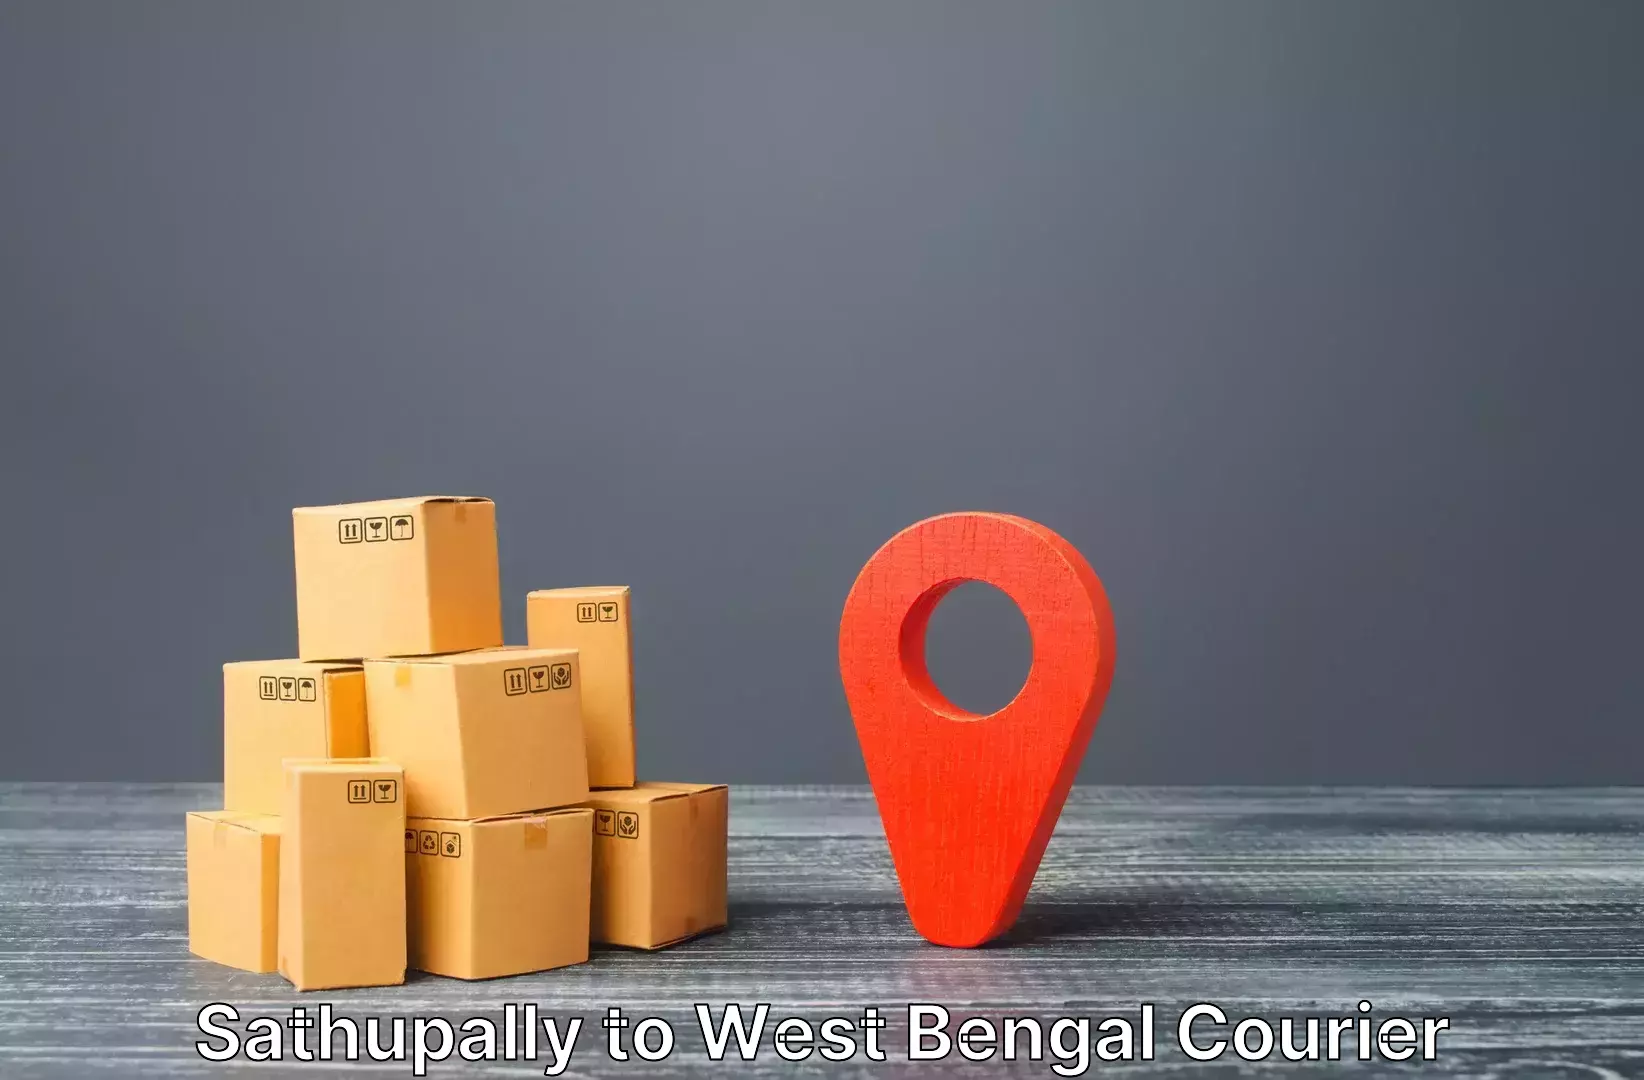 Luggage delivery app Sathupally to Fatepur